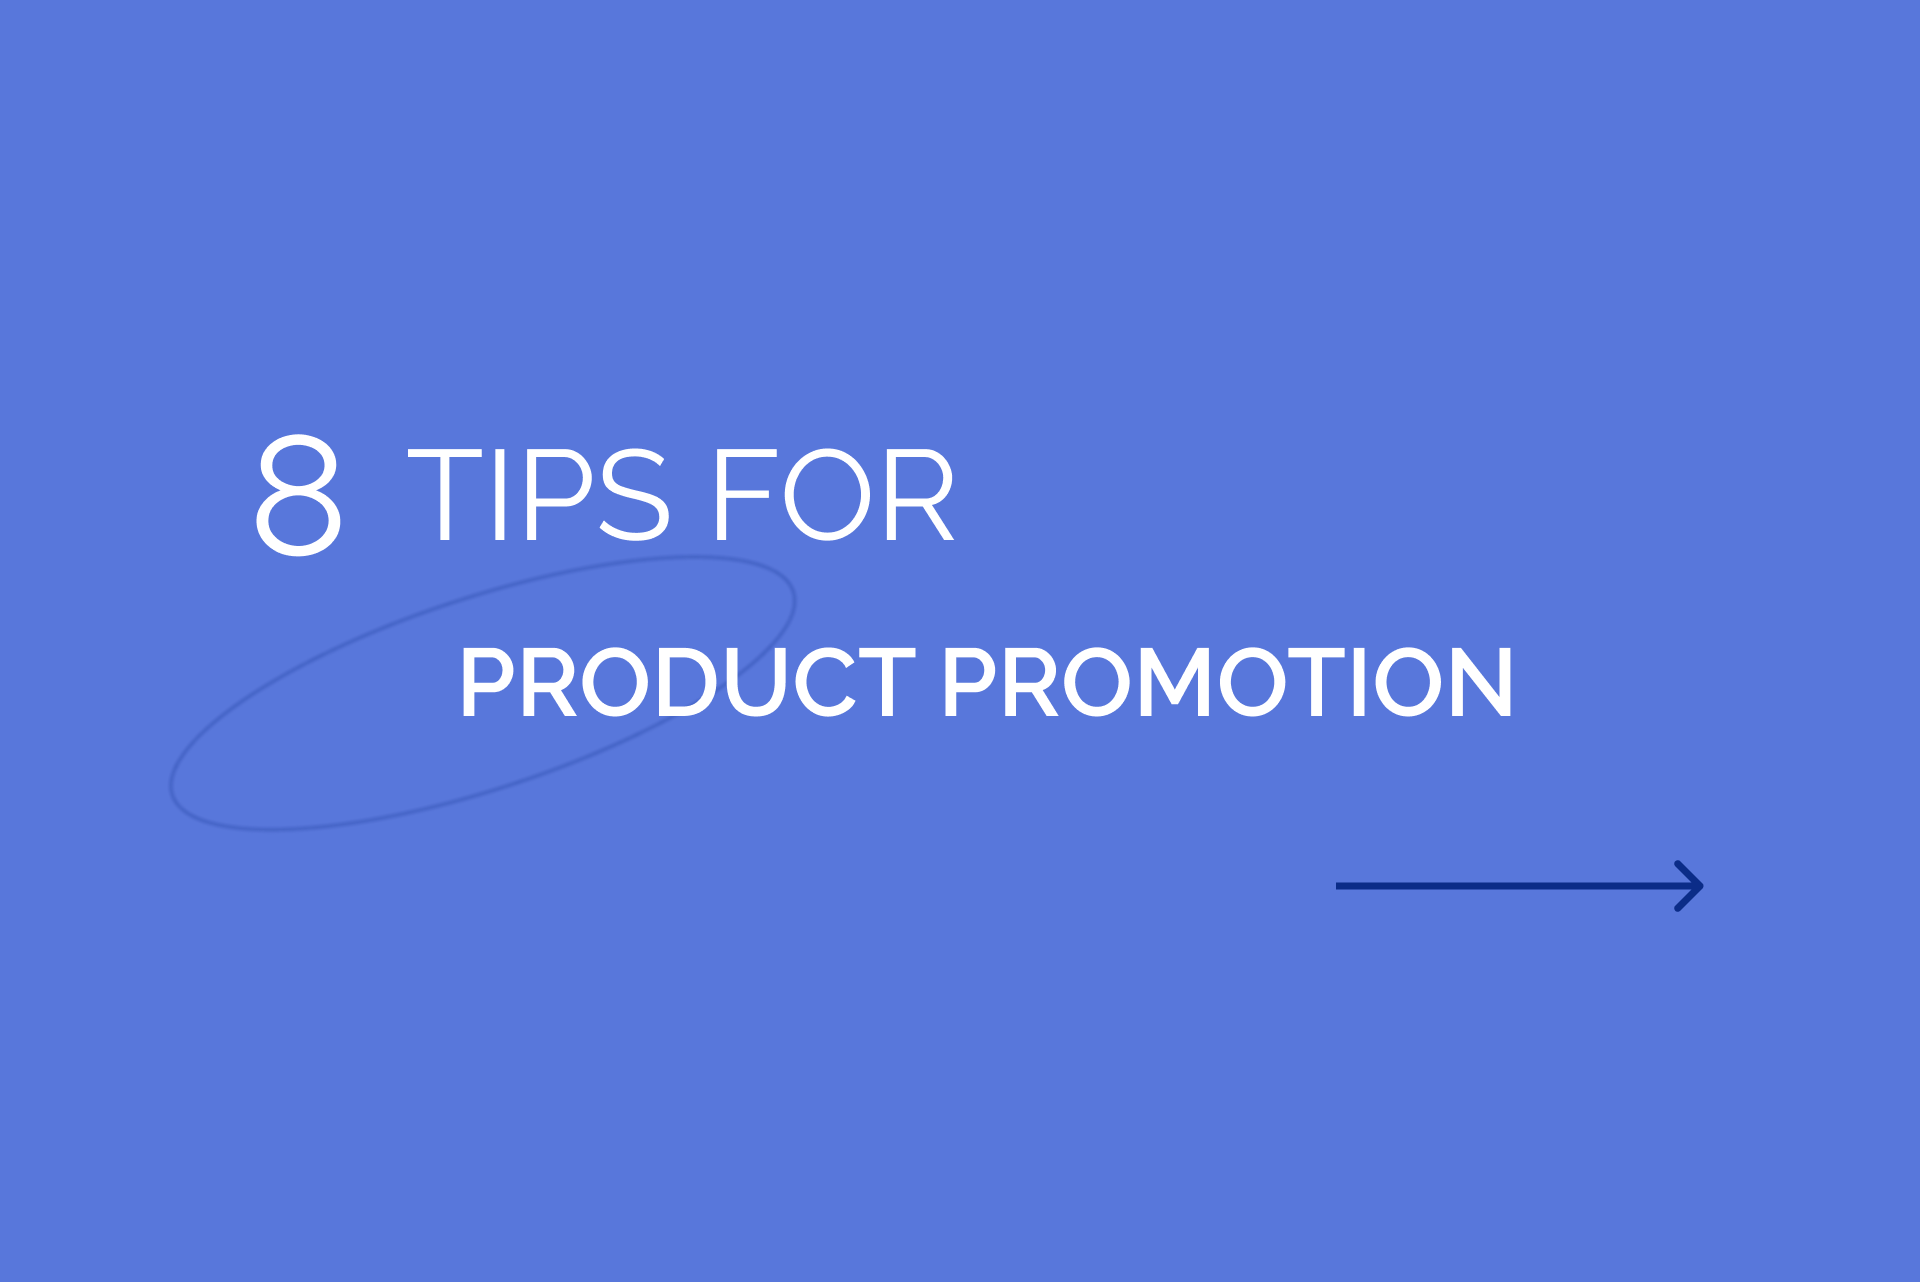 8 tips for product promotion